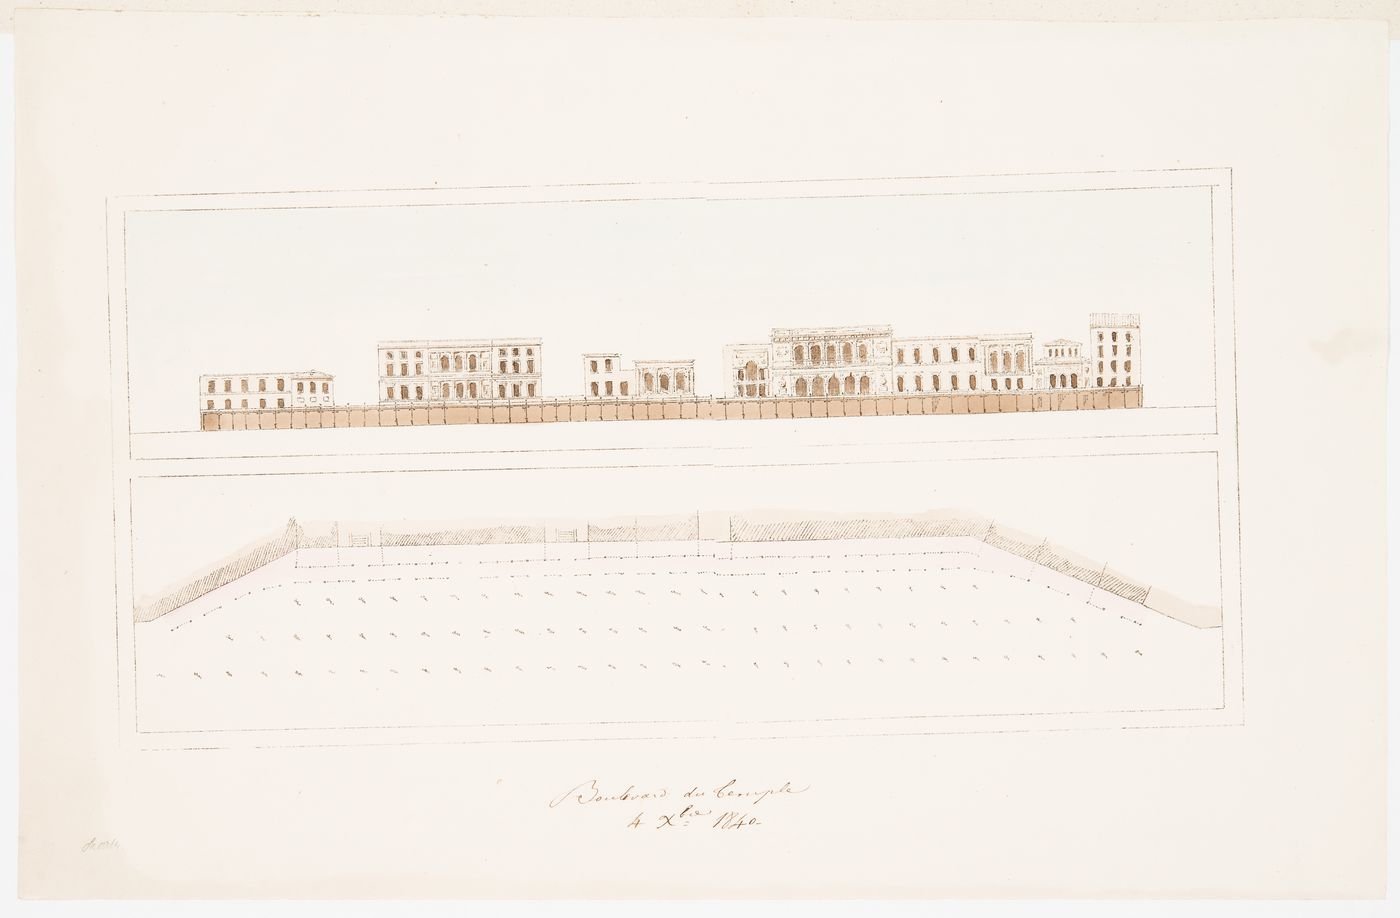 Iron arcades for the boulevard du Temple: Elevation and plan